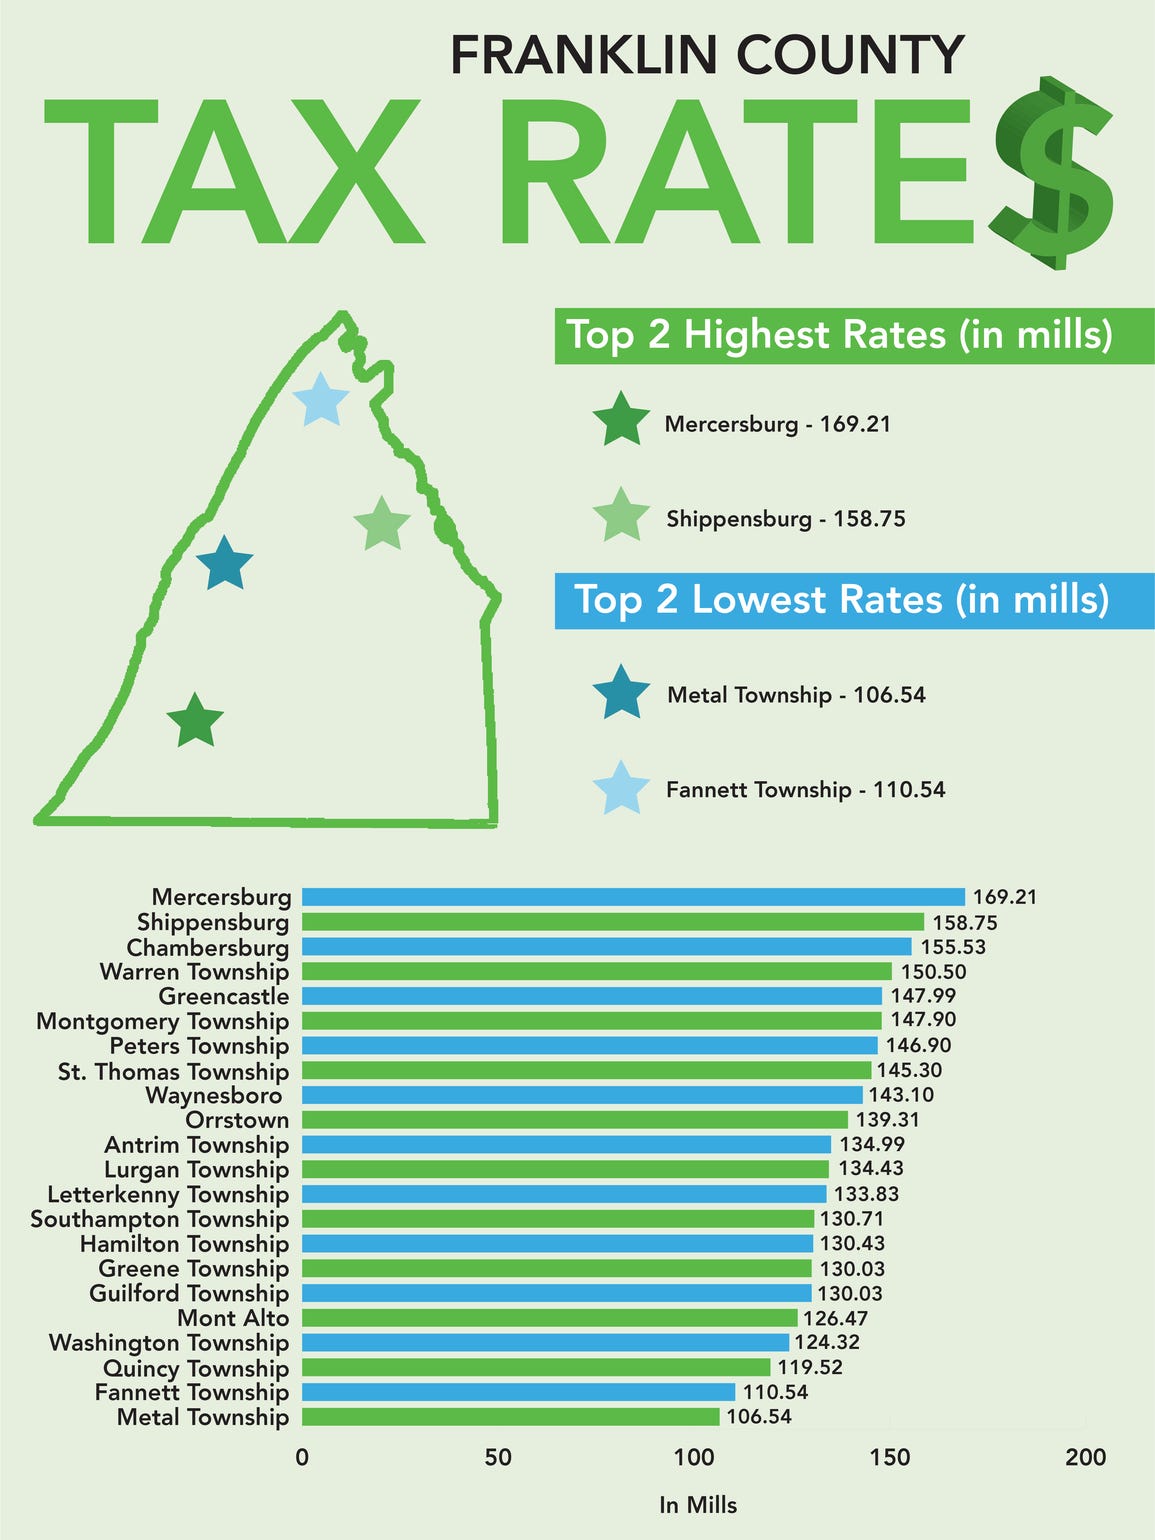 Whose taxes are highest?